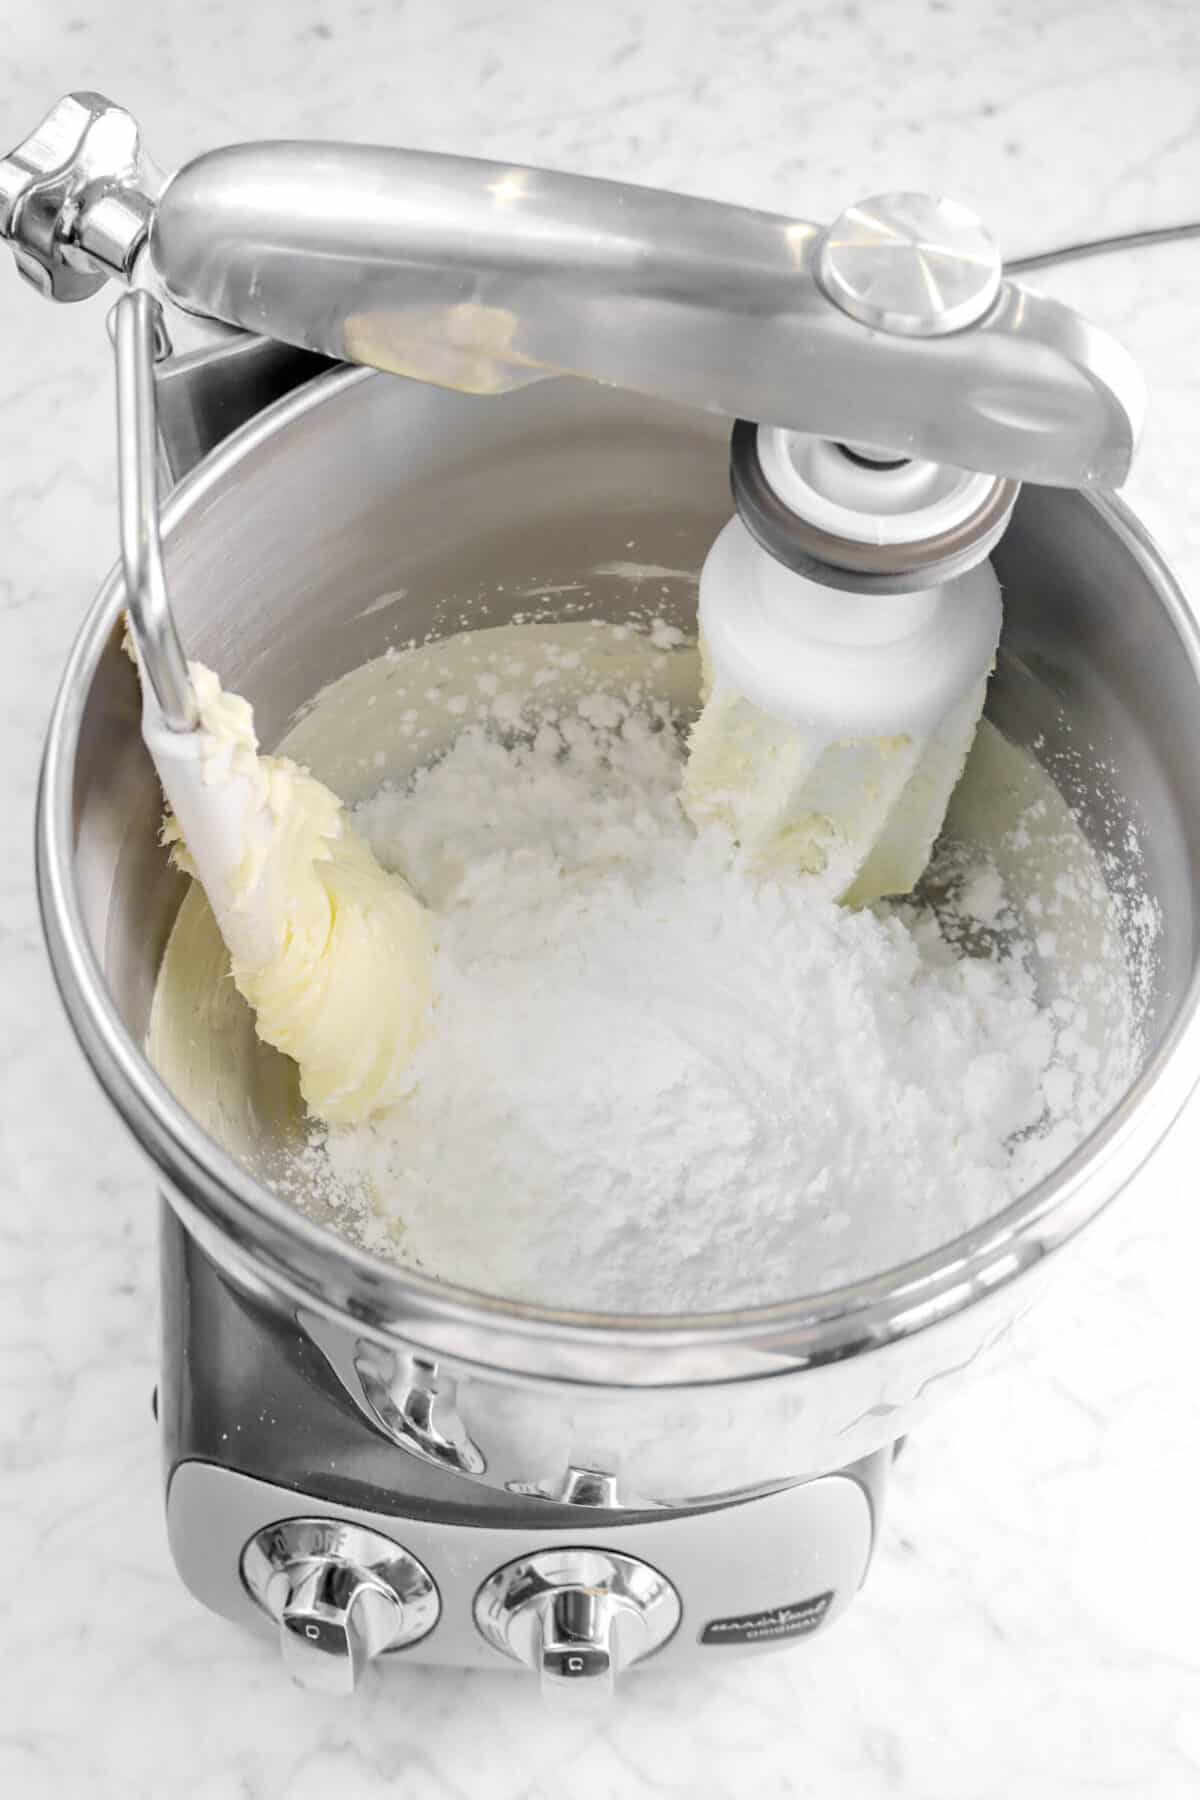 Powdered sugar added to butter